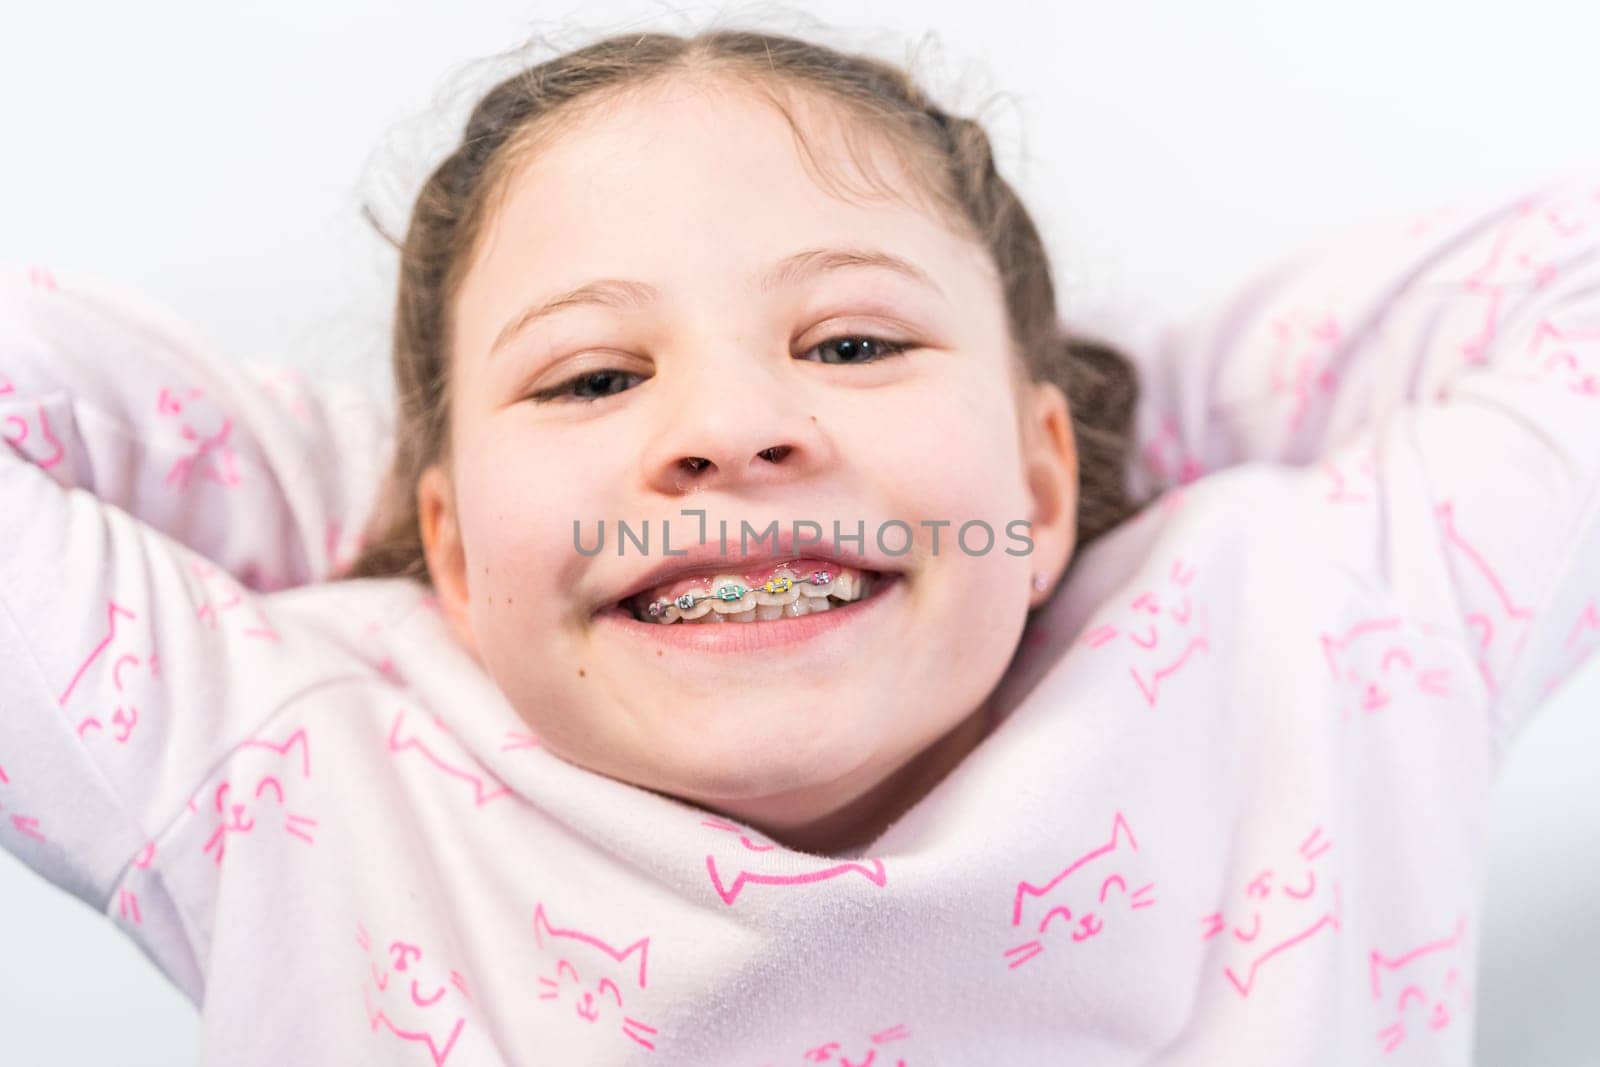 Little girl with rainbow braces smiling at the camera.